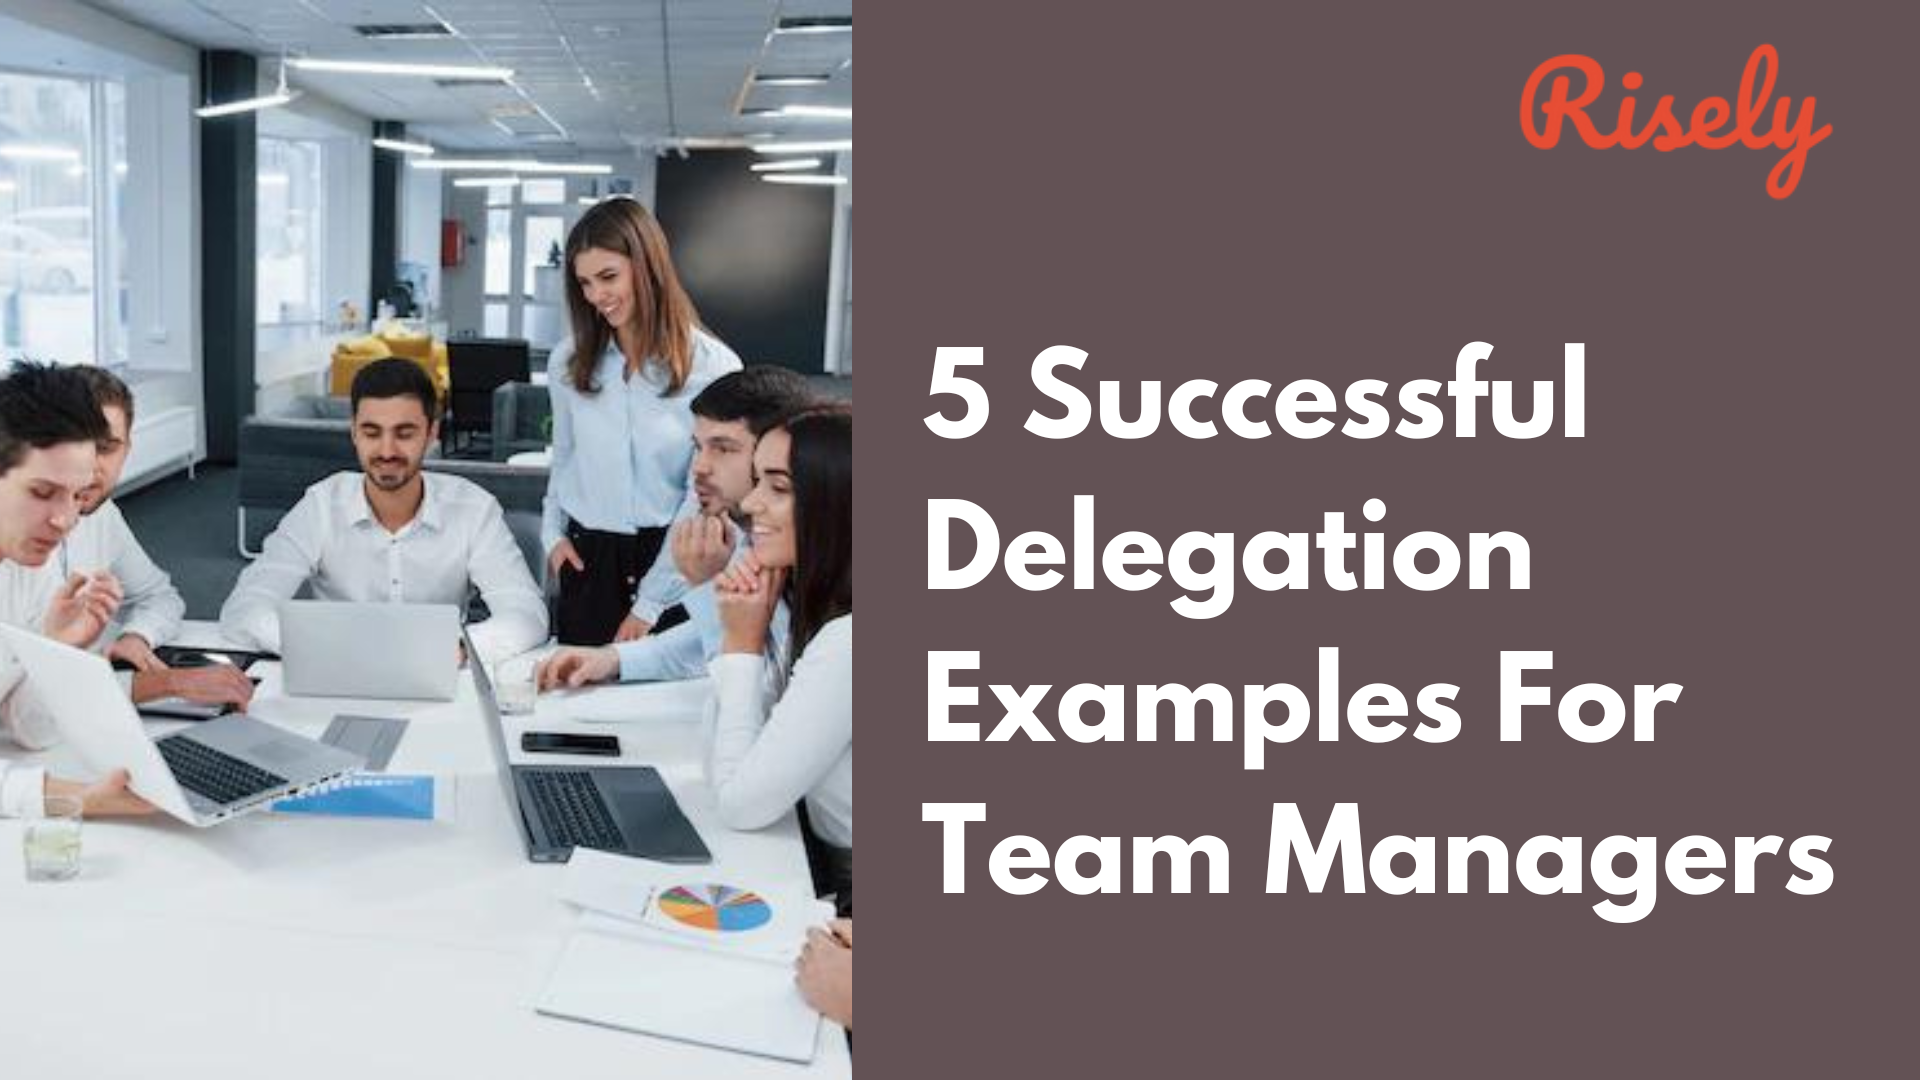 5 Successful Delegation Examples For Team Managers